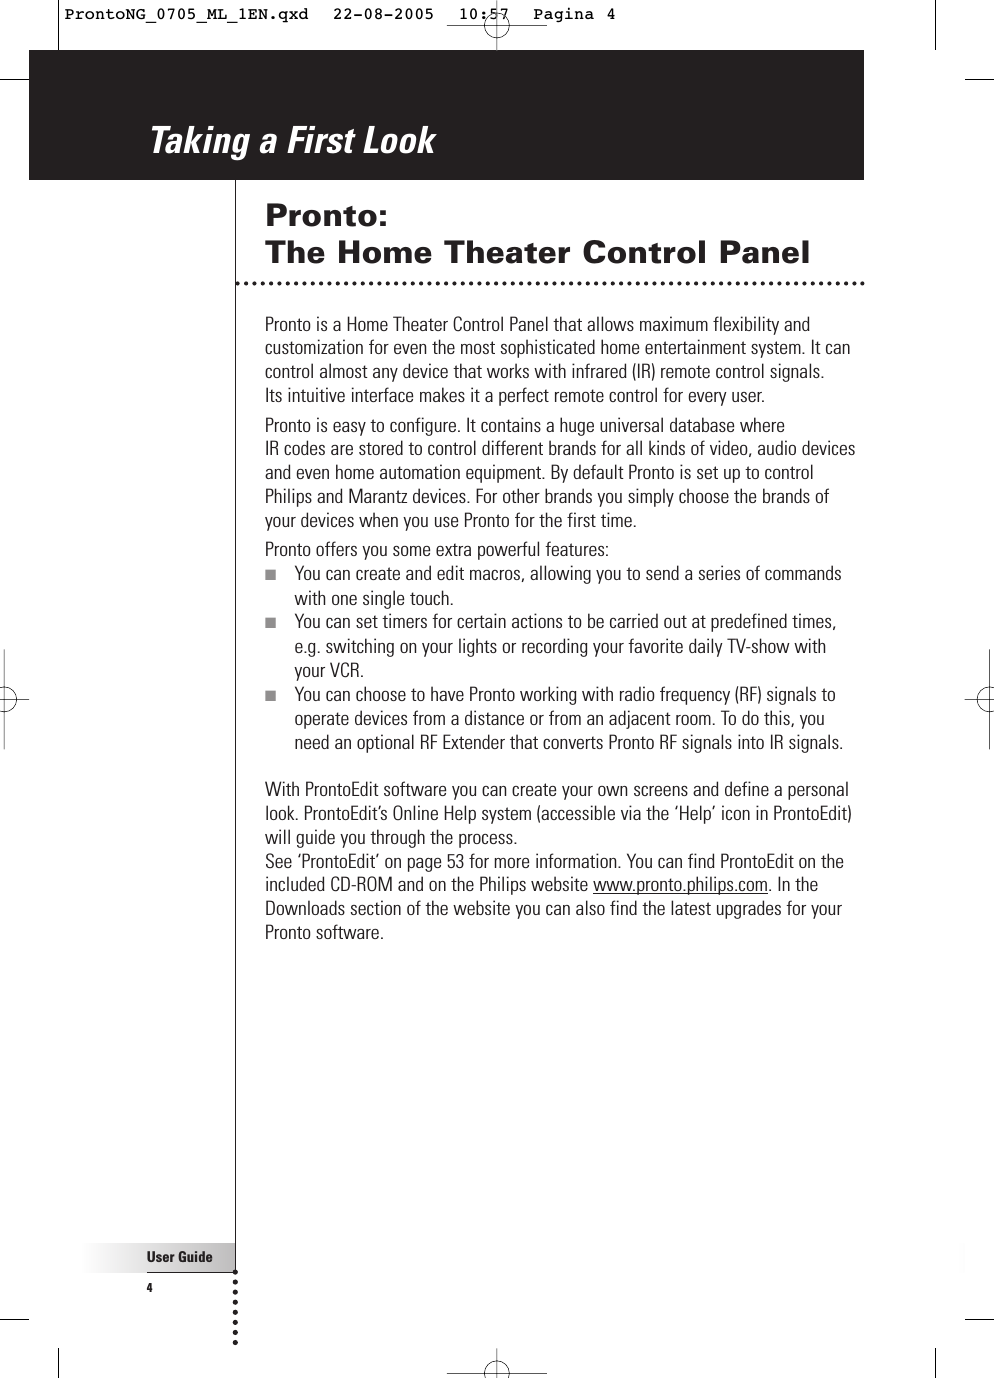 User Guide4Taking a First LookPronto: The Home Theater Control PanelPronto is a Home Theater Control Panel that allows maximum flexibility andcustomization for even the most sophisticated home entertainment system. It cancontrol almost any device that works with infrared (IR) remote control signals. Its intuitive interface makes it a perfect remote control for every user.Pronto is easy to configure. It contains a huge universal database where IR codes are stored to control different brands for all kinds of video, audio devicesand even home automation equipment. By default Pronto is set up to controlPhilips and Marantz devices. For other brands you simply choose the brands ofyour devices when you use Pronto for the first time.Pronto offers you some extra powerful features:■You can create and edit macros, allowing you to send a series of commandswith one single touch.■You can set timers for certain actions to be carried out at predefined times,e.g. switching on your lights or recording your favorite daily TV-show with your VCR.■You can choose to have Pronto working with radio frequency (RF) signals tooperate devices from a distance or from an adjacent room. To do this, youneed an optional RF Extender that converts Pronto RF signals into IR signals.With ProntoEdit software you can create your own screens and define a personallook. ProntoEdit’s Online Help system (accessible via the ‘Help’ icon in ProntoEdit)will guide you through the process. See ‘ProntoEdit’ on page 53 for more information. You can find ProntoEdit on theincluded CD-ROM and on the Philips website www.pronto.philips.com. In theDownloads section of the website you can also find the latest upgrades for yourPronto software.ProntoNG_0705_ML_1EN.qxd  22-08-2005  10:57  Pagina 4